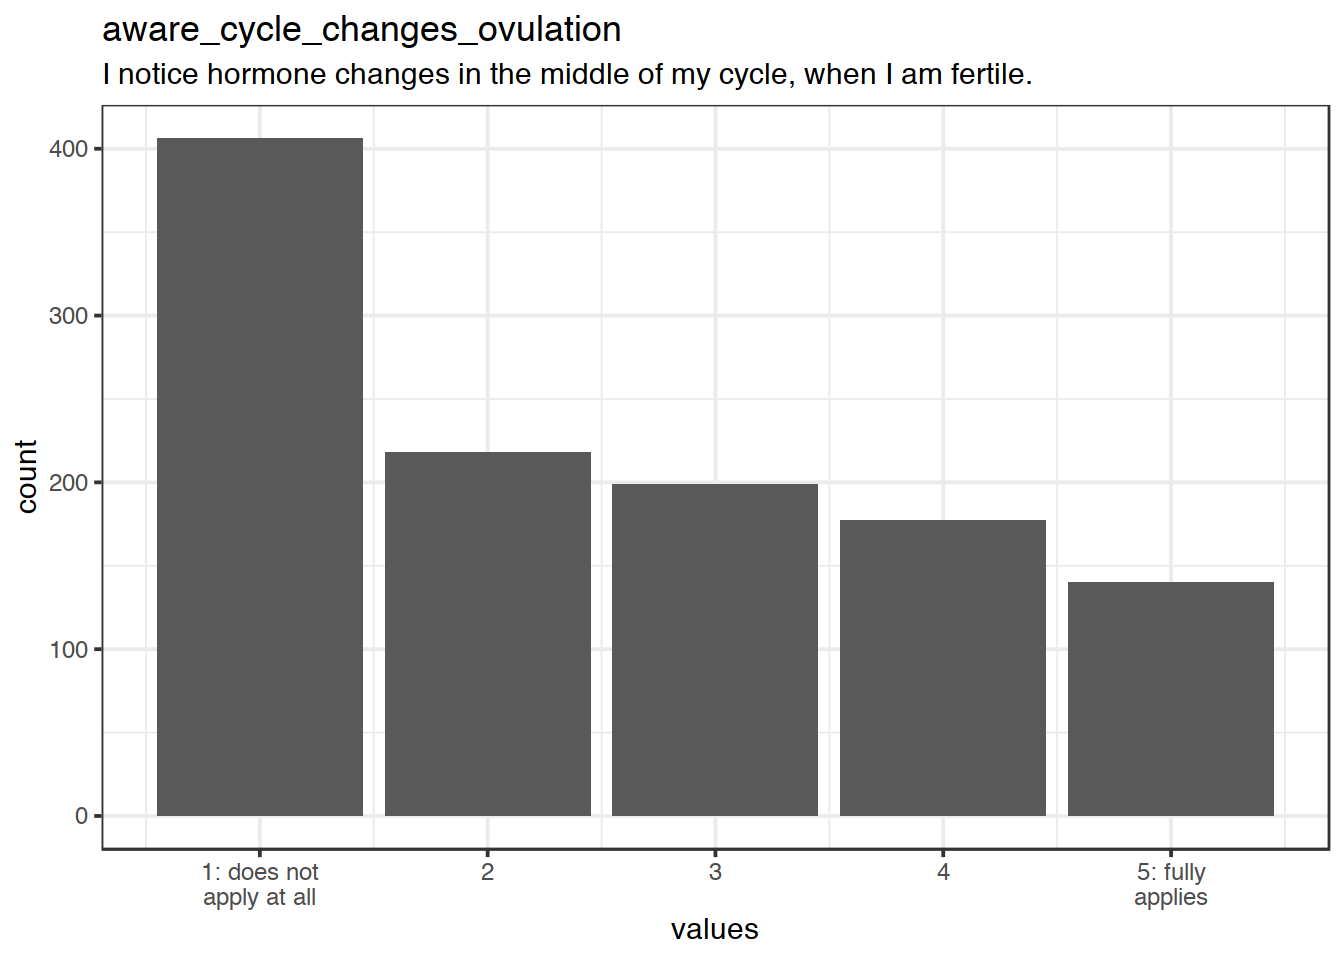 Distribution of values for aware_cycle_changes_ovulation